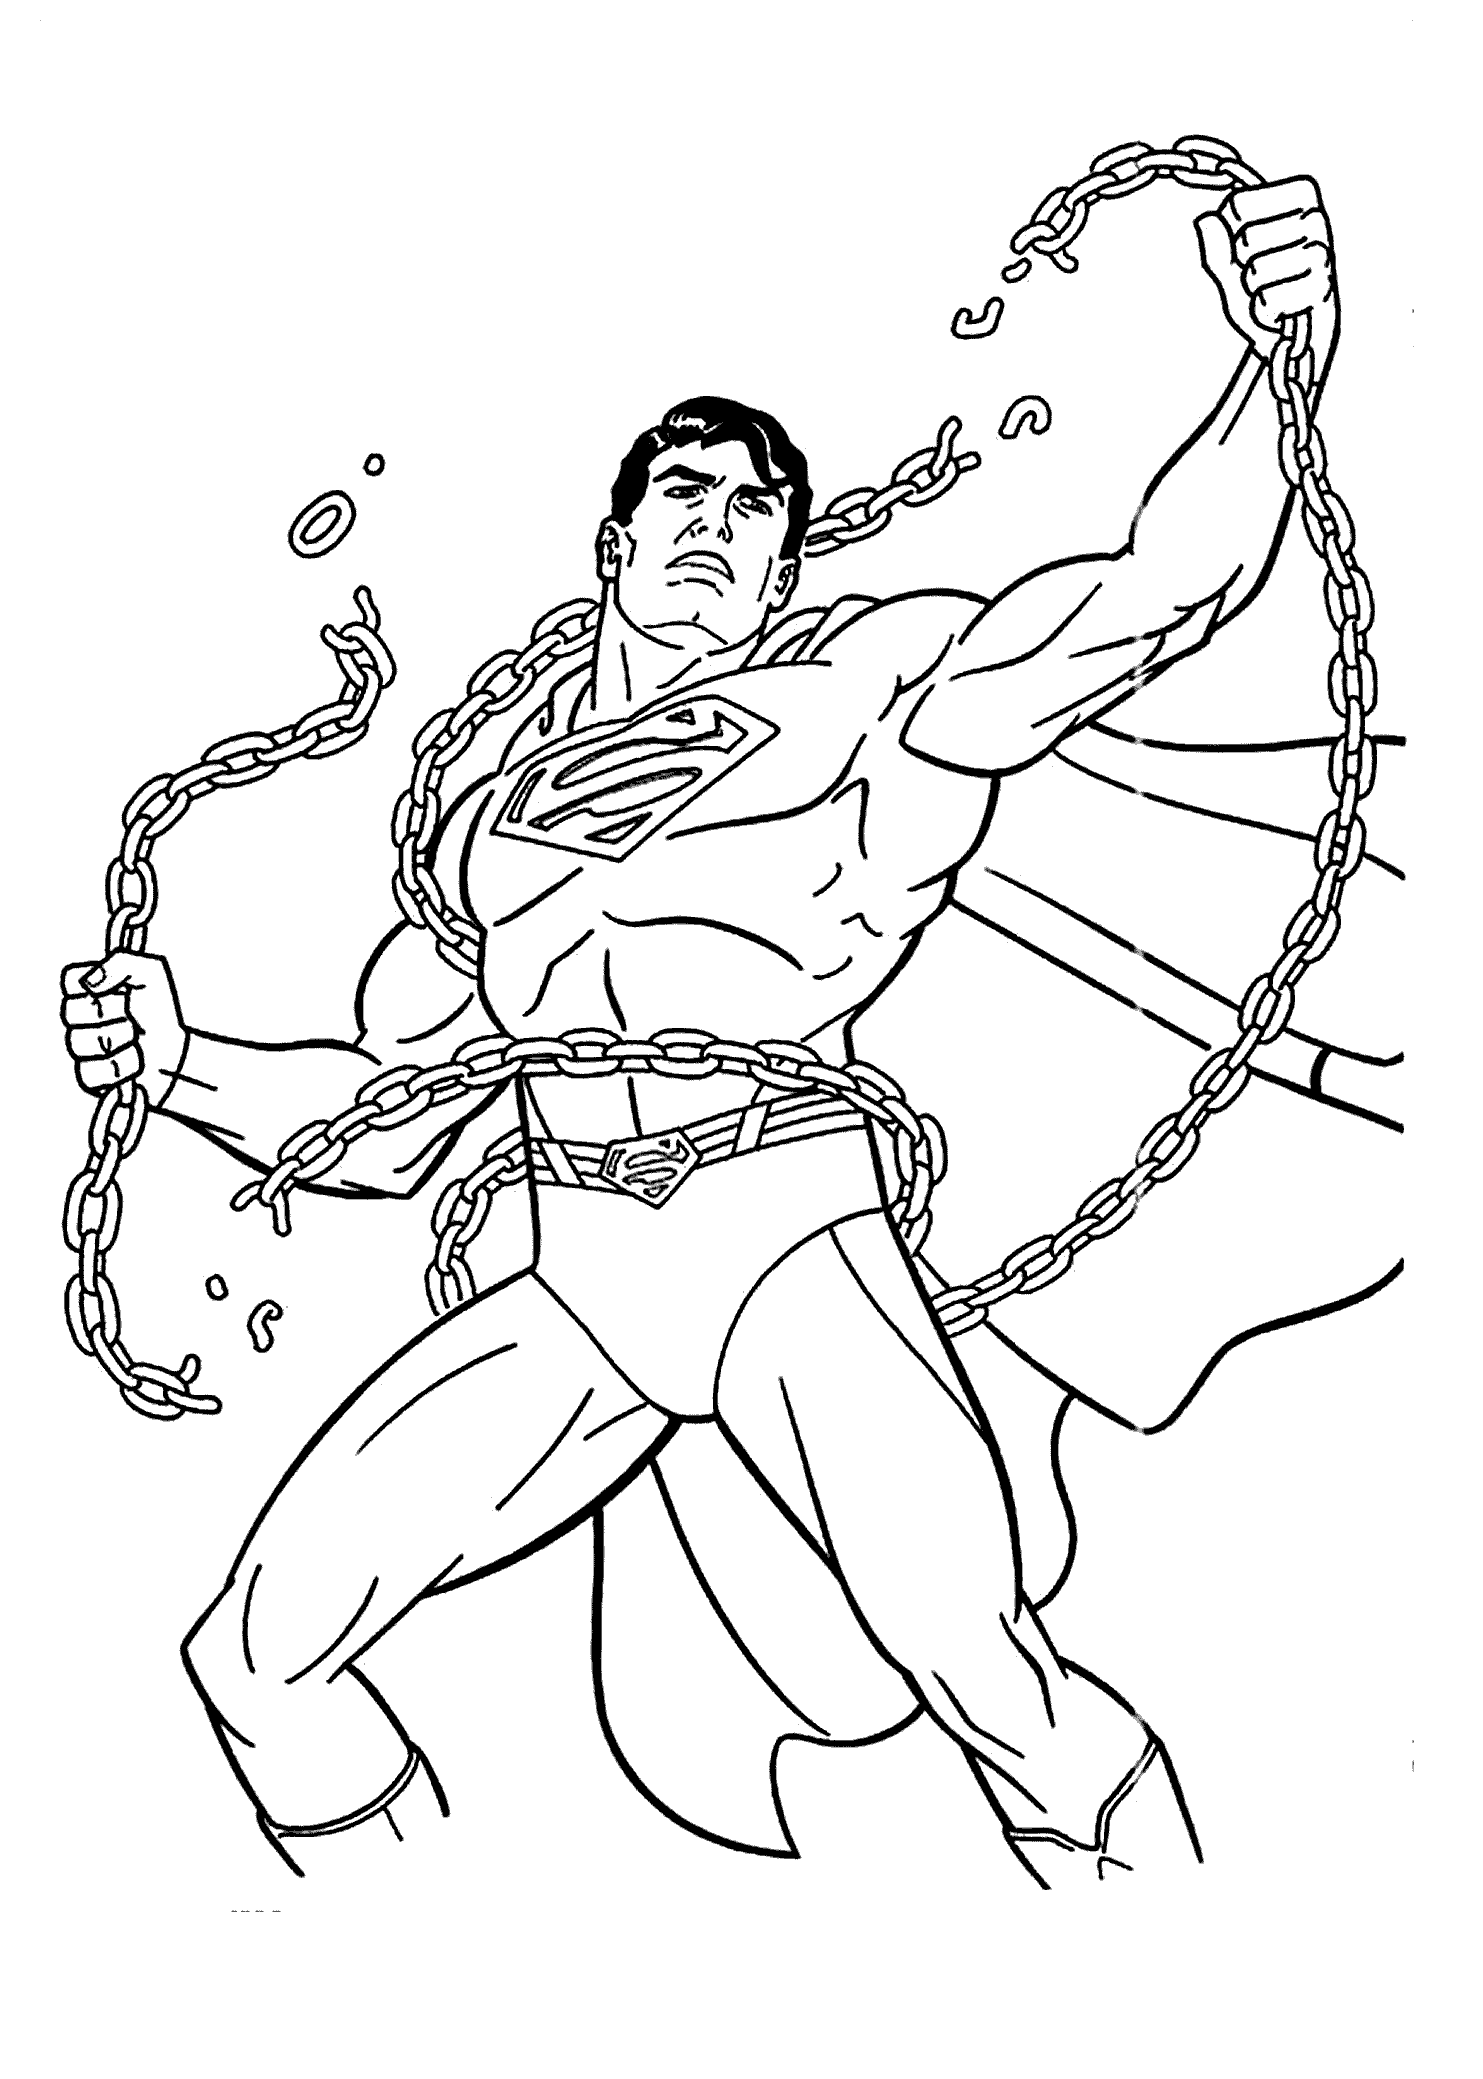 Superman coloring pages for kids printable free | coloing-4kids.com